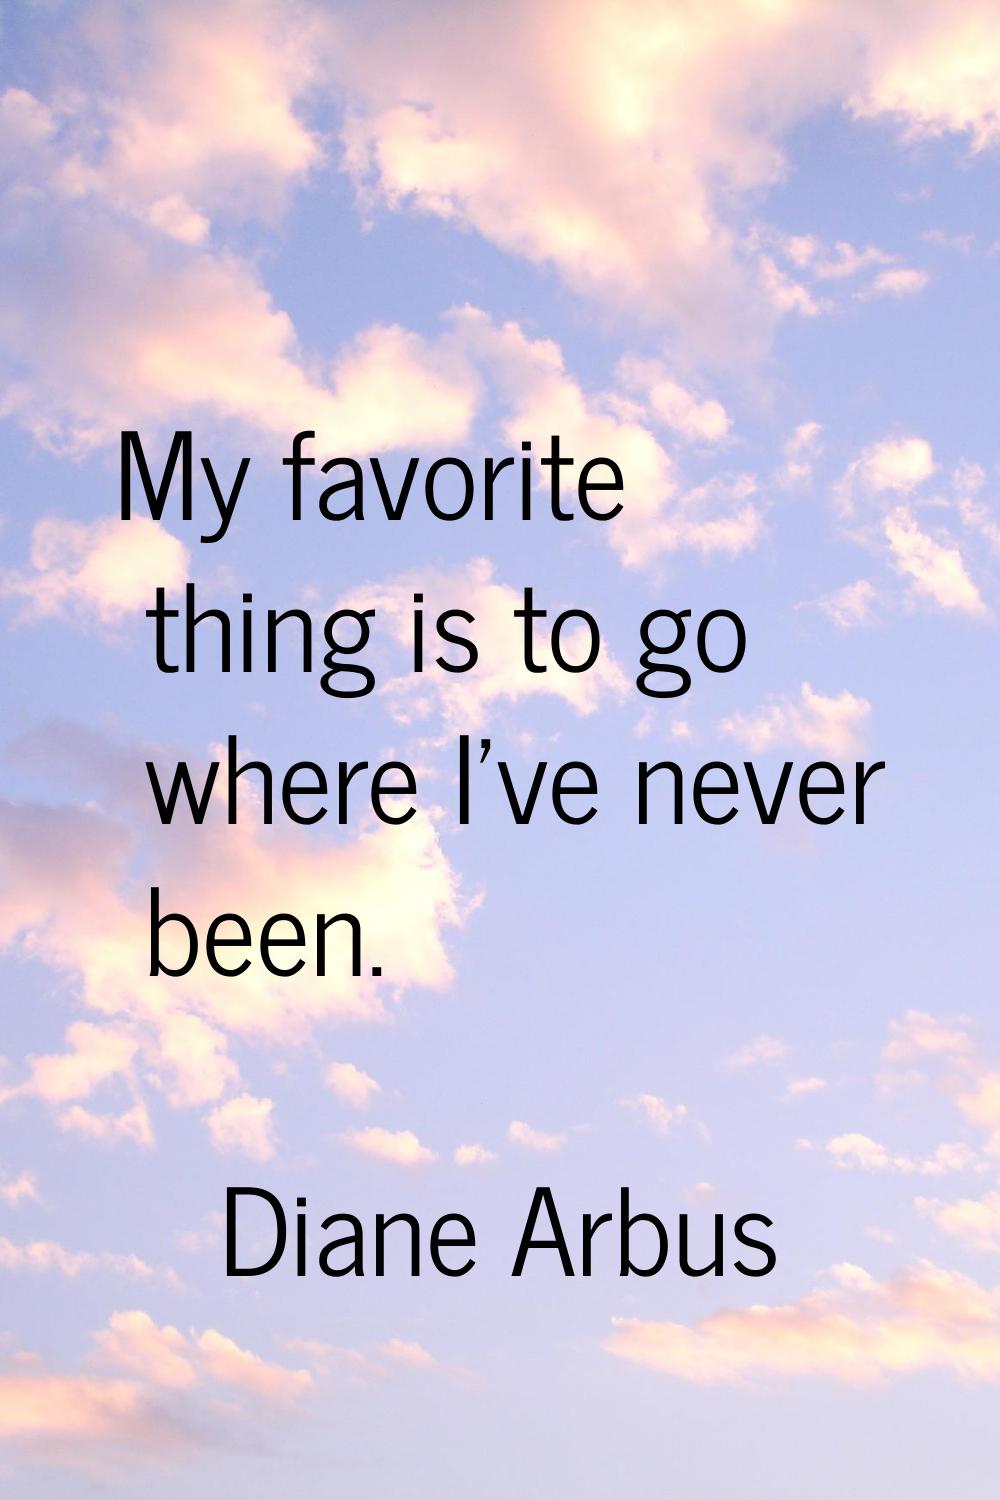 My favorite thing is to go where I've never been.